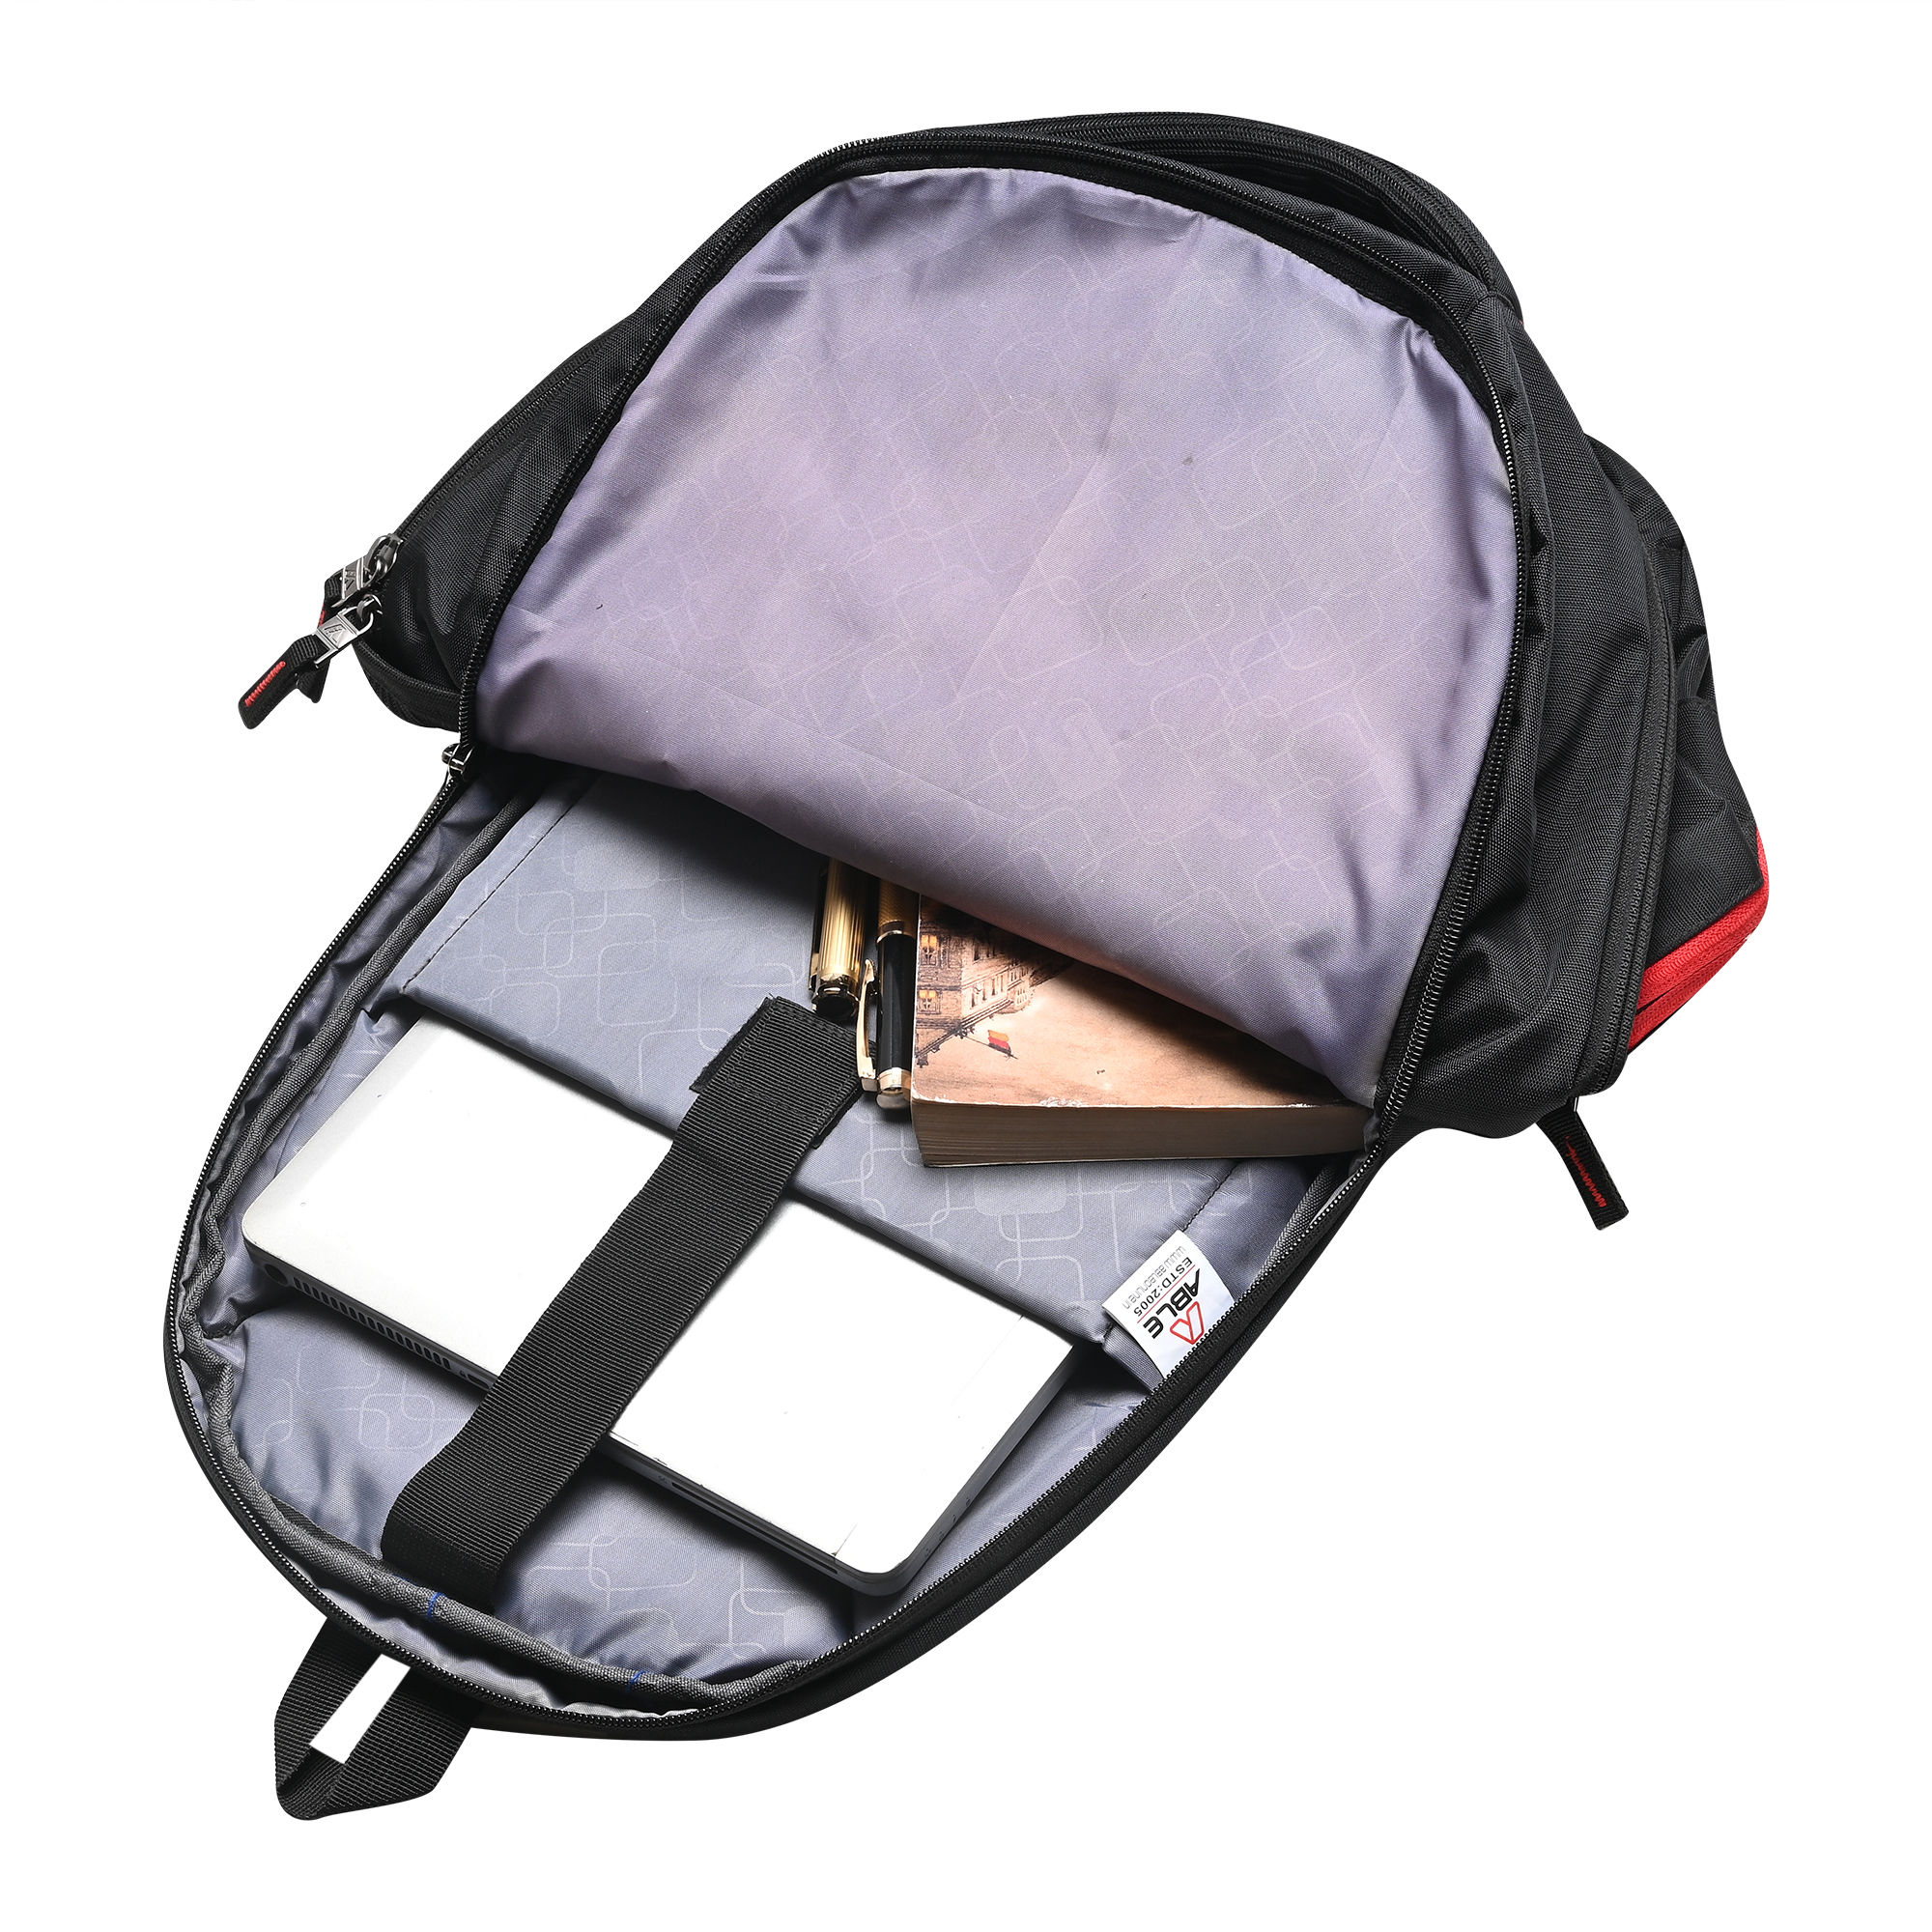 Able Rafter Backpack